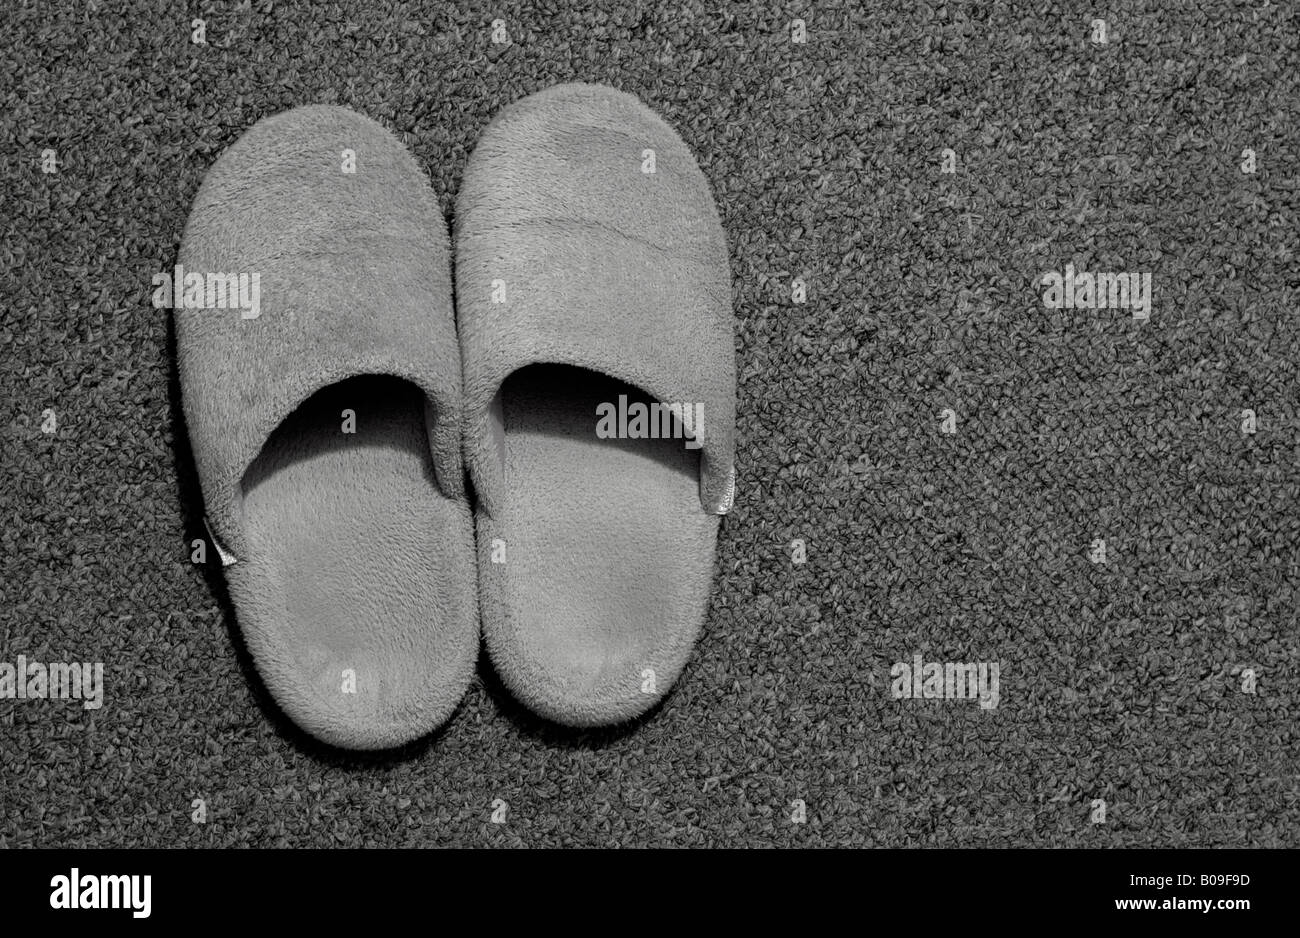 Pair of slippers on carpet close up Stock Photo